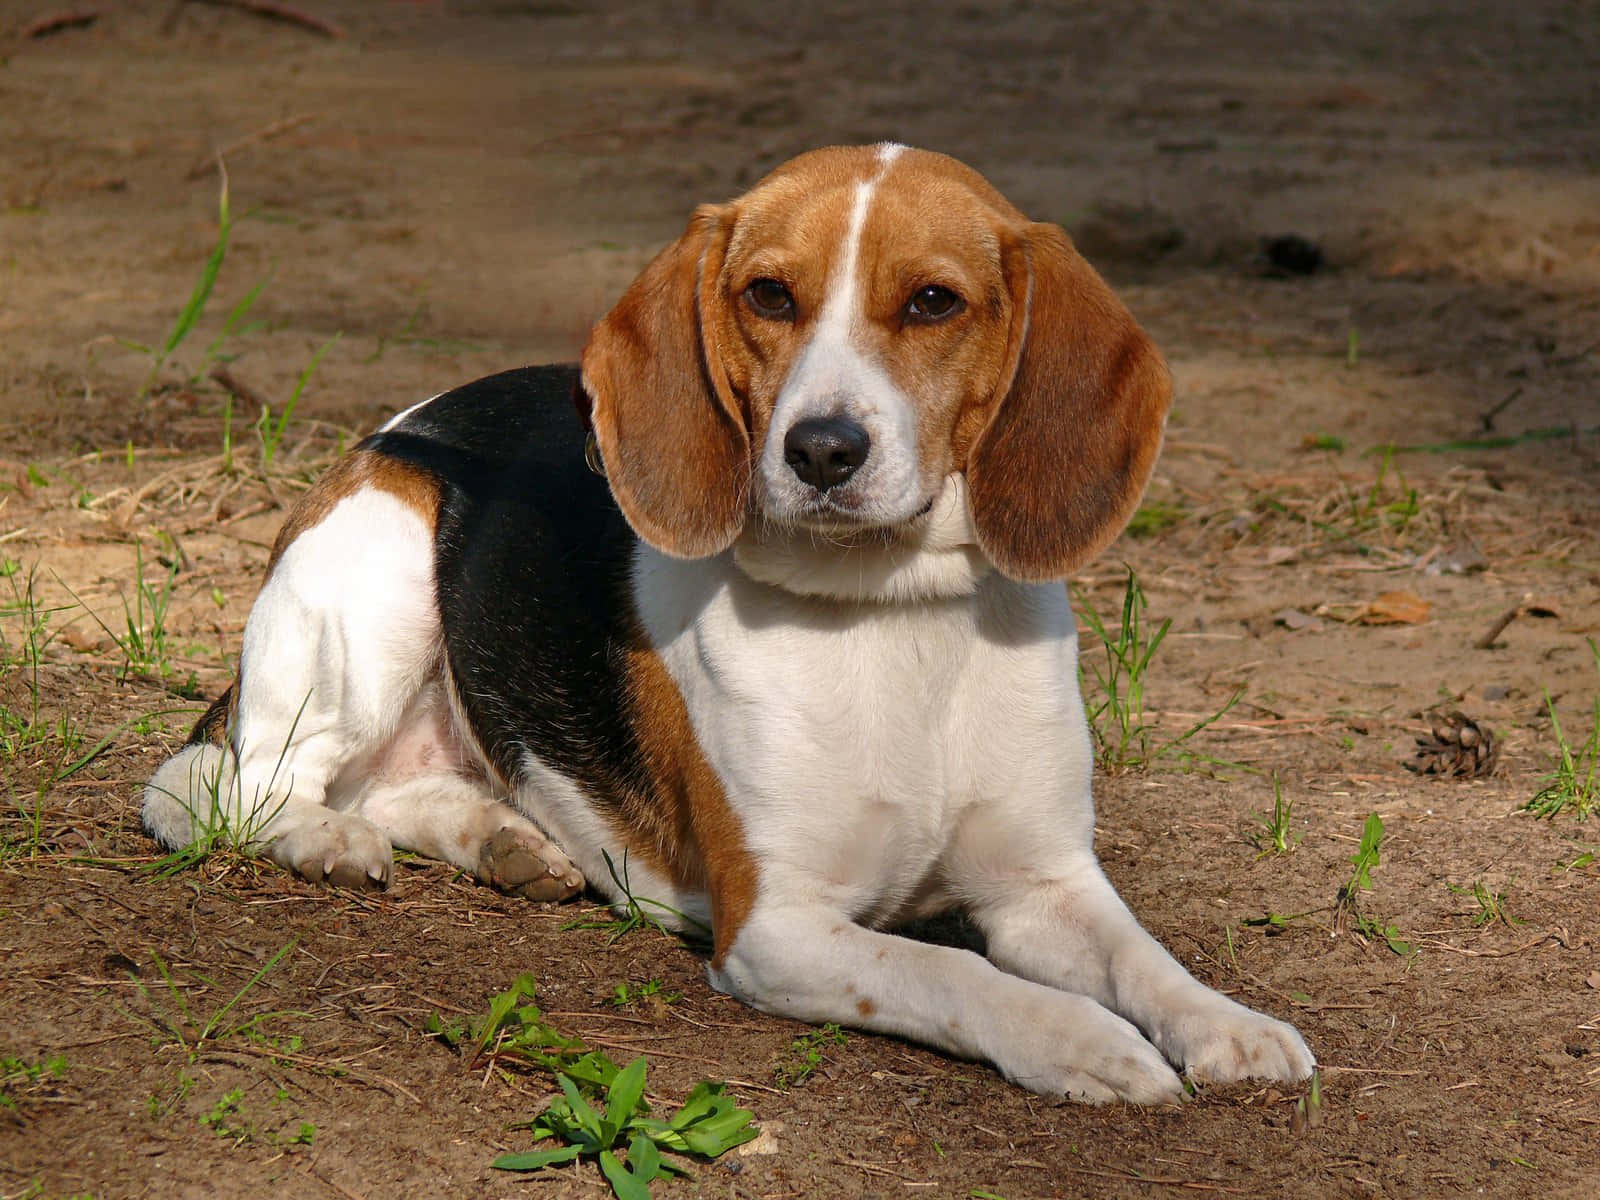 "A beagle smiles and shines as it sits in the sun"